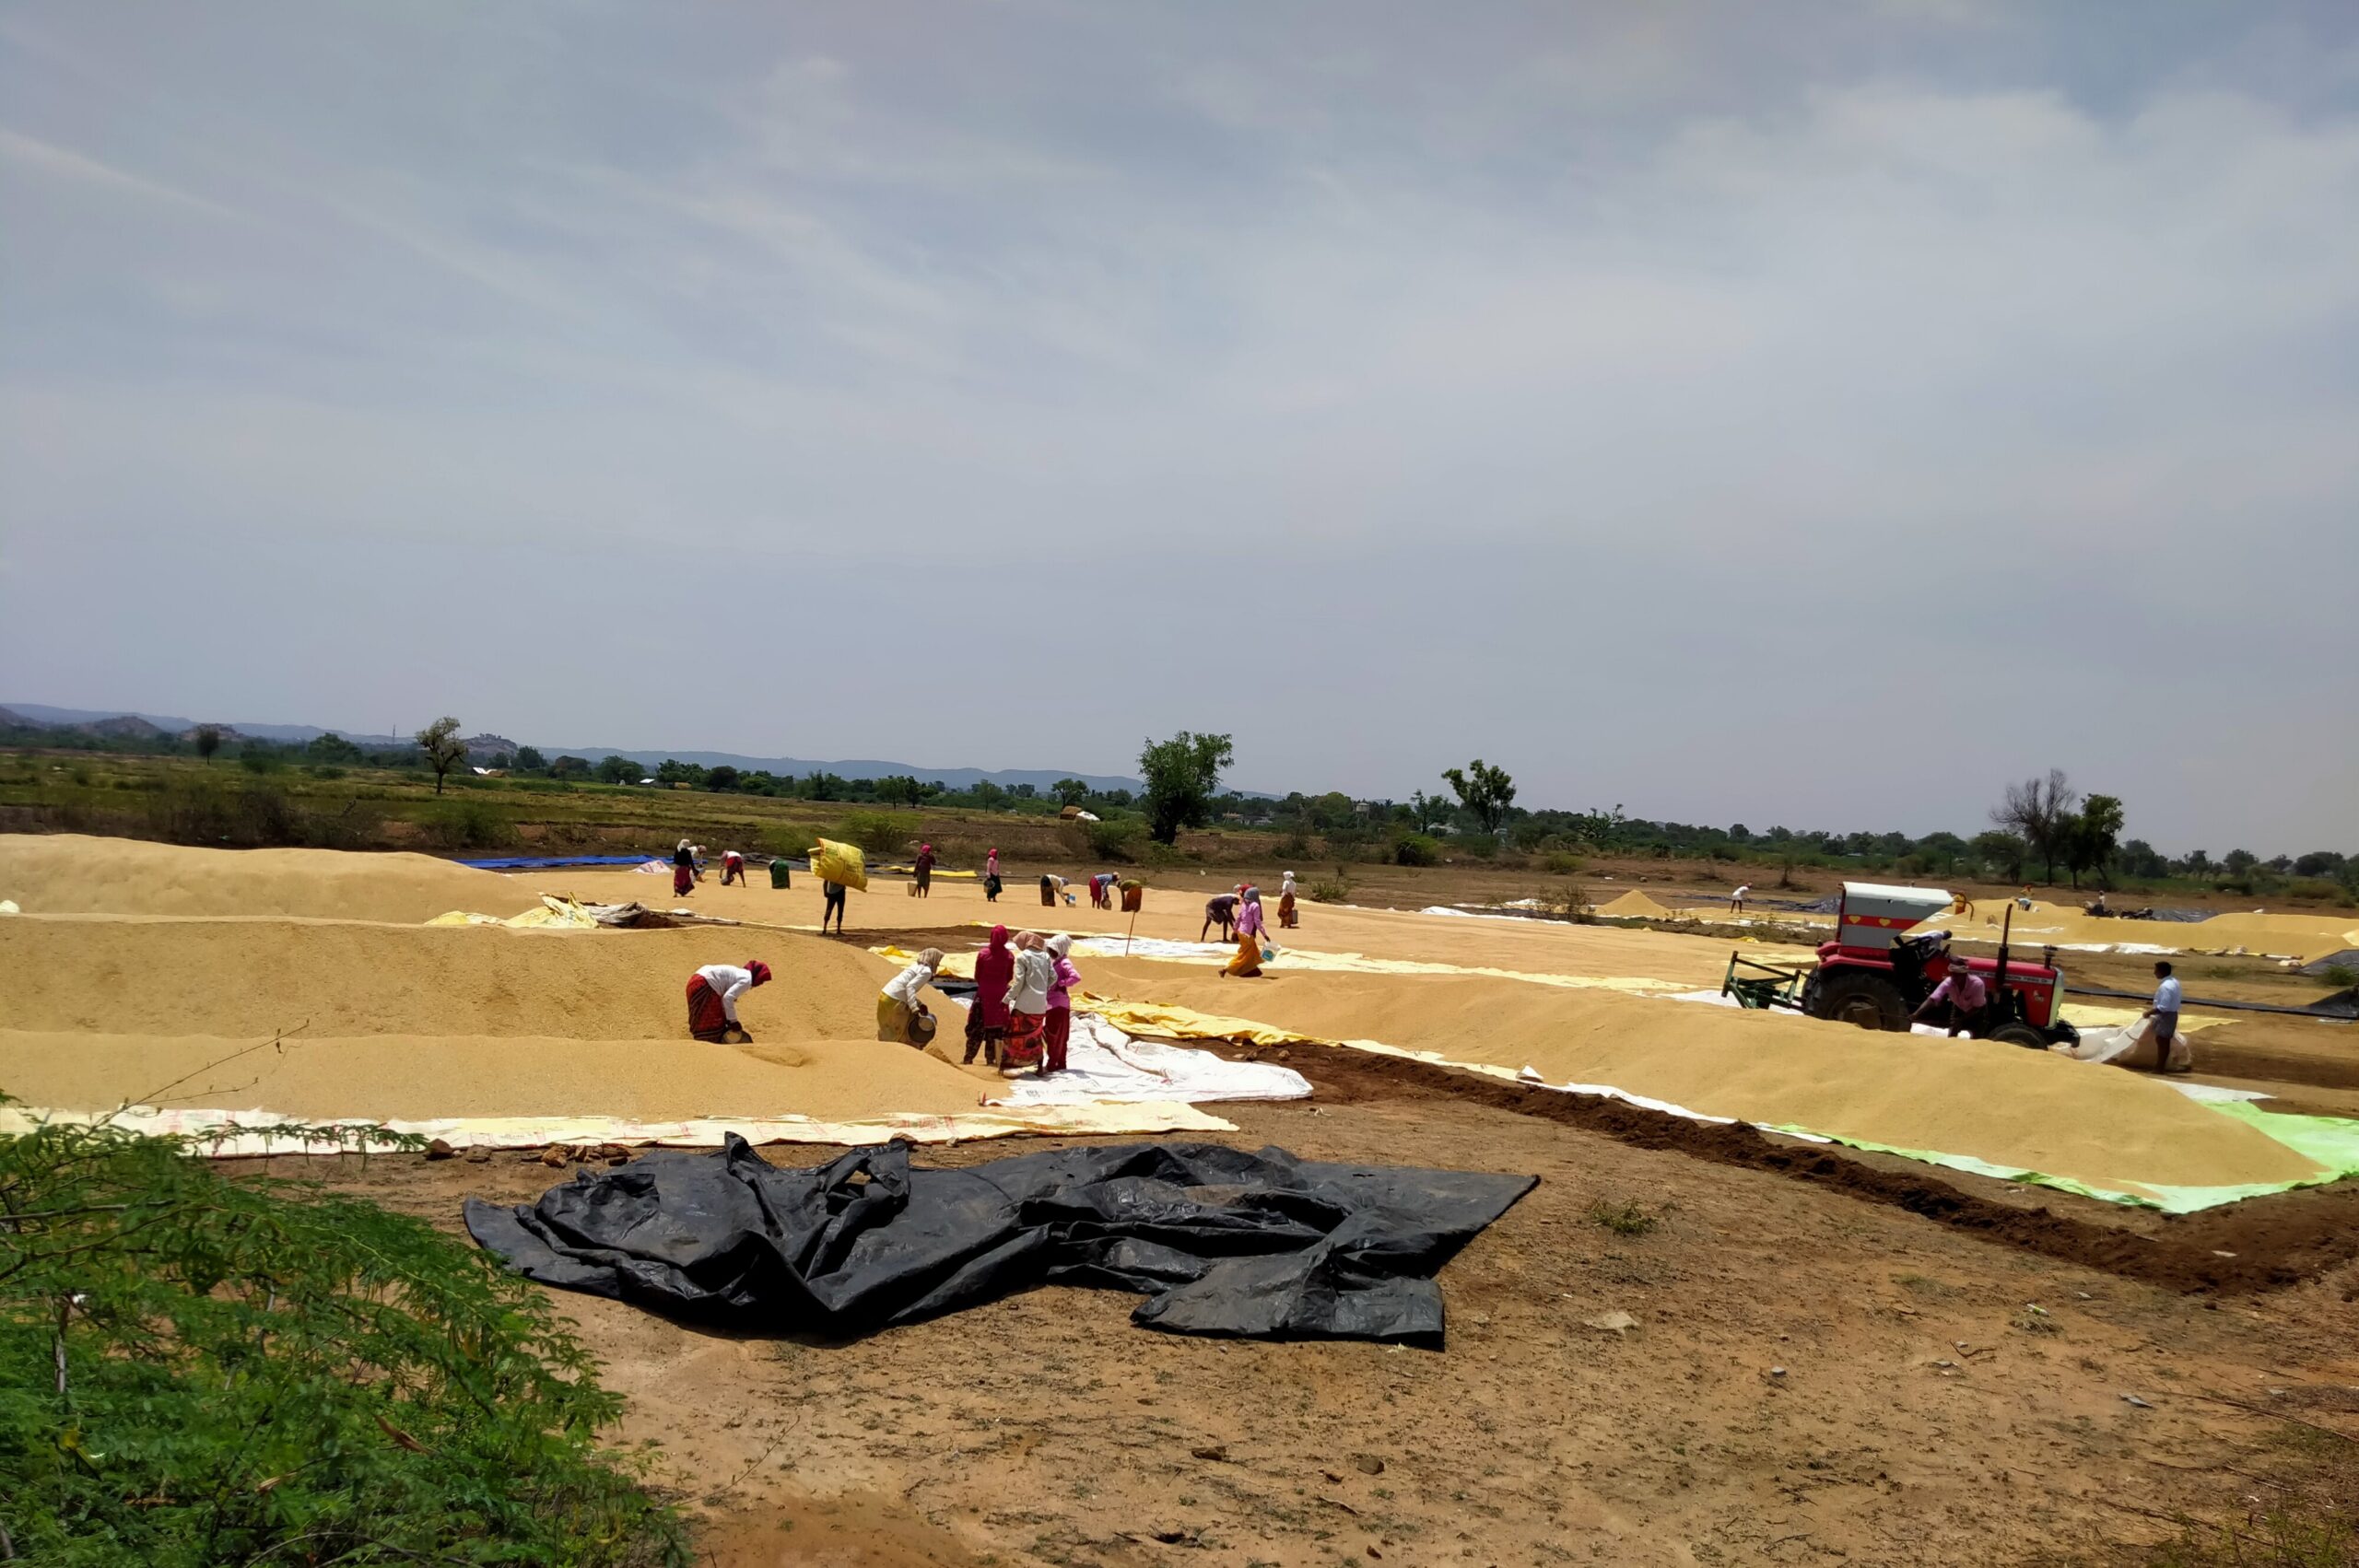 Farmers dry and package harvested paddy in Mukkanal, Karnataka, India.